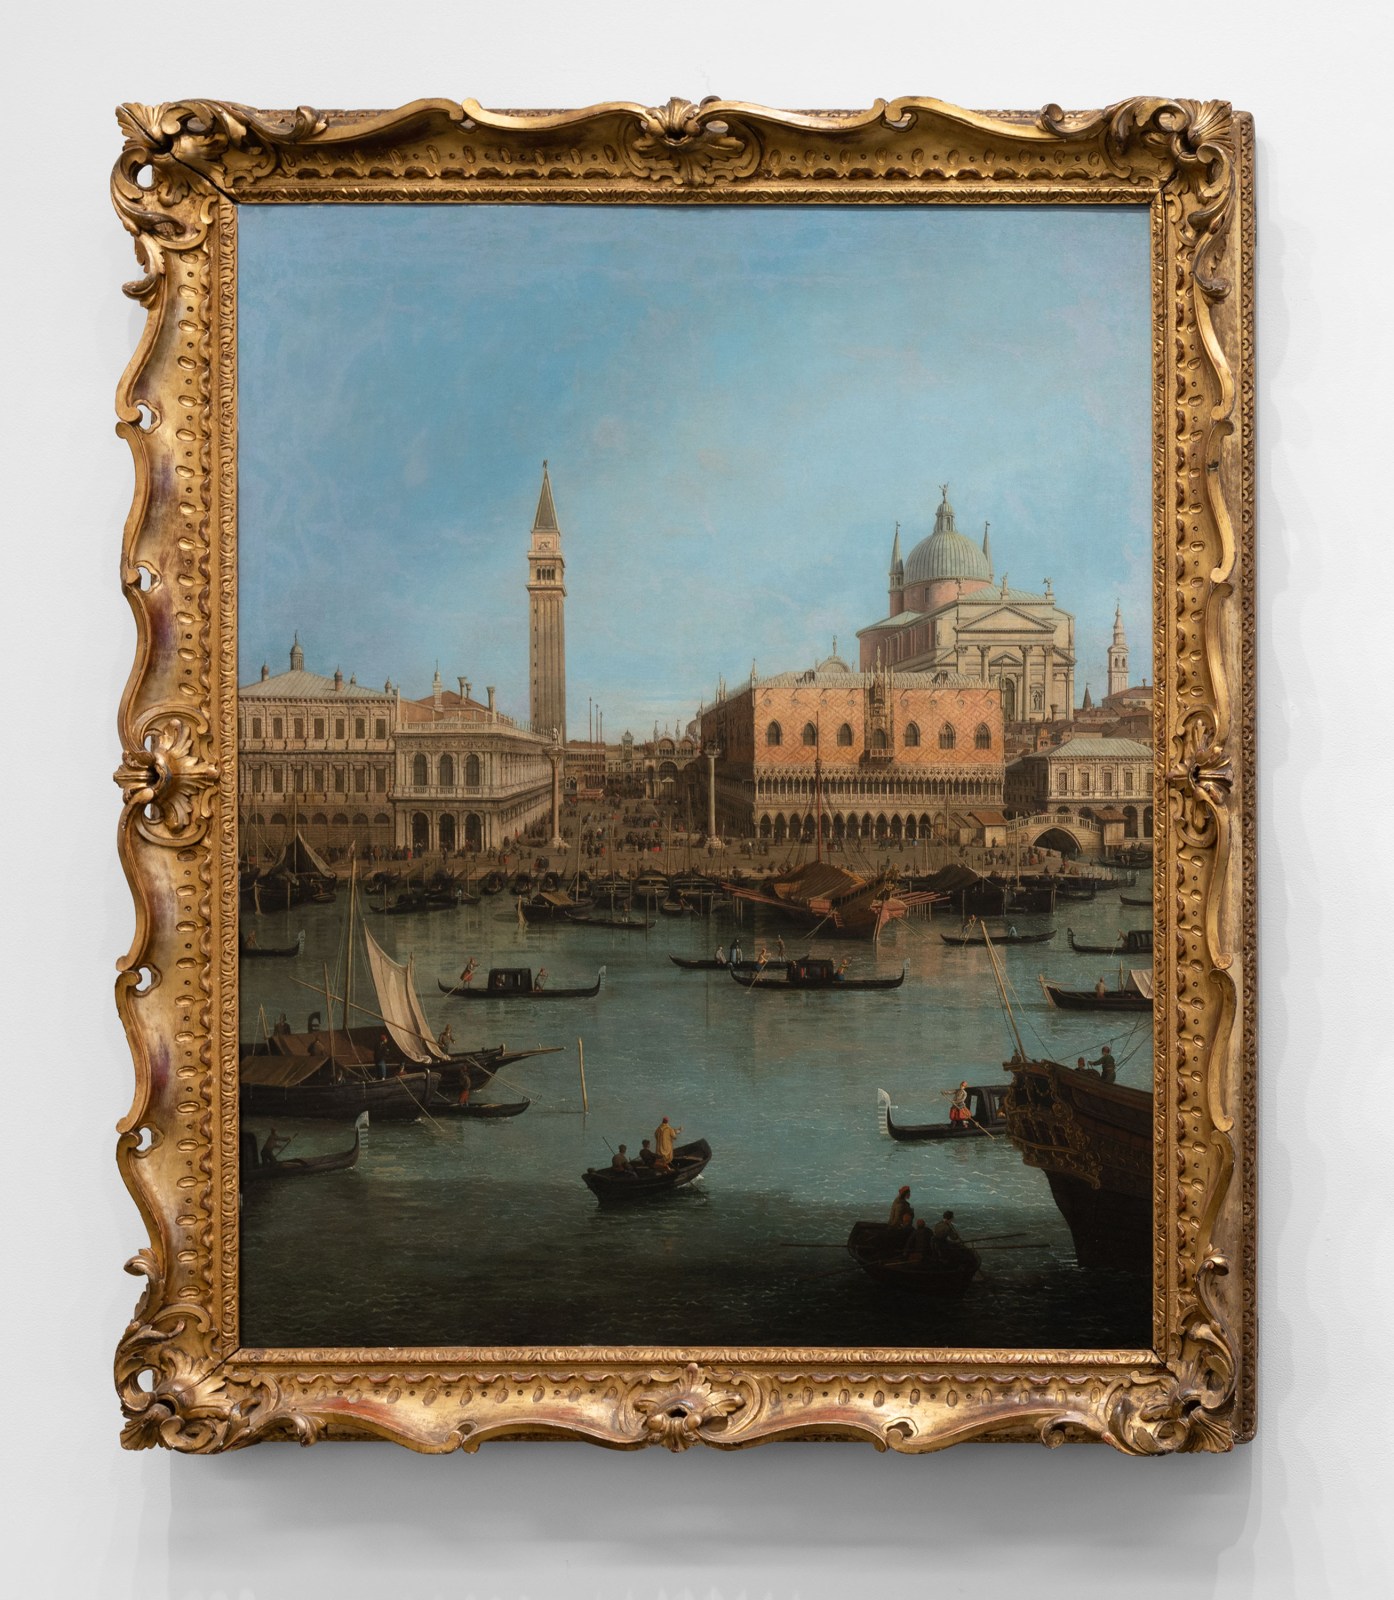 Giovanni Antonio Canal, called Canaletto (Venice, 1697&ndash;1768), Capriccio with St. Mark&#039;s Basin and the Redentore